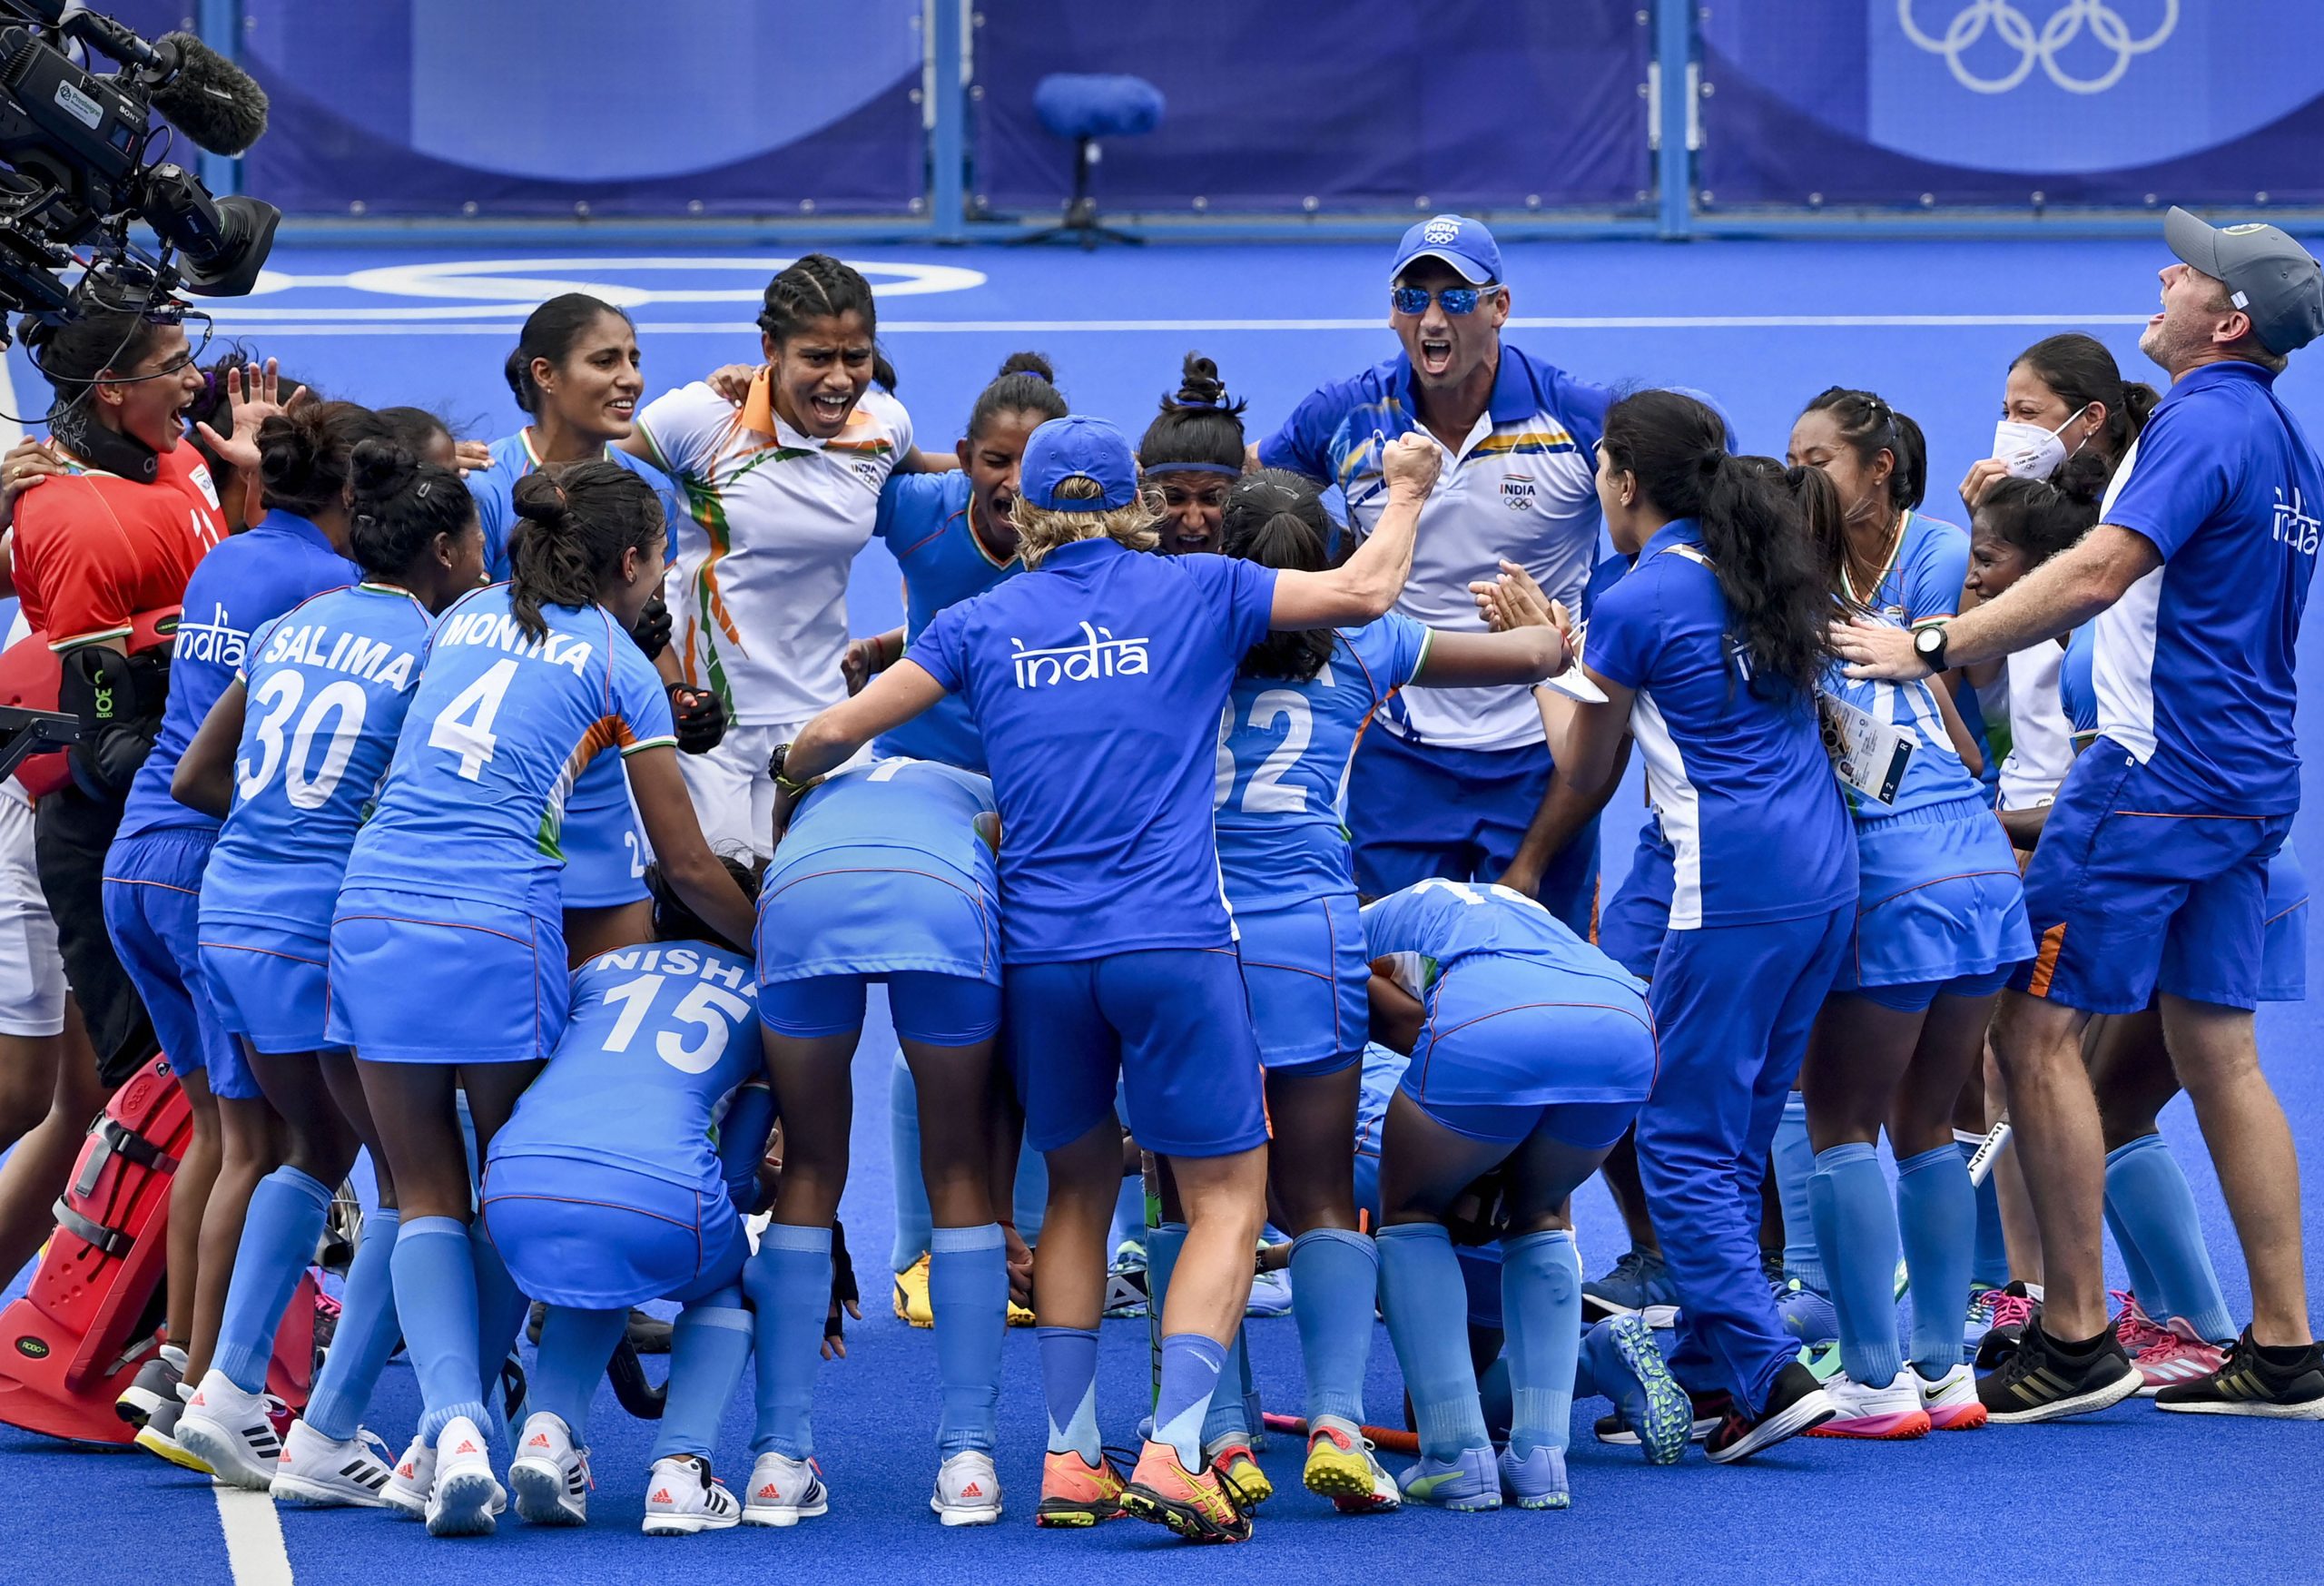 Diamantaire promises money, car if Indian women win Olympic hockey medal